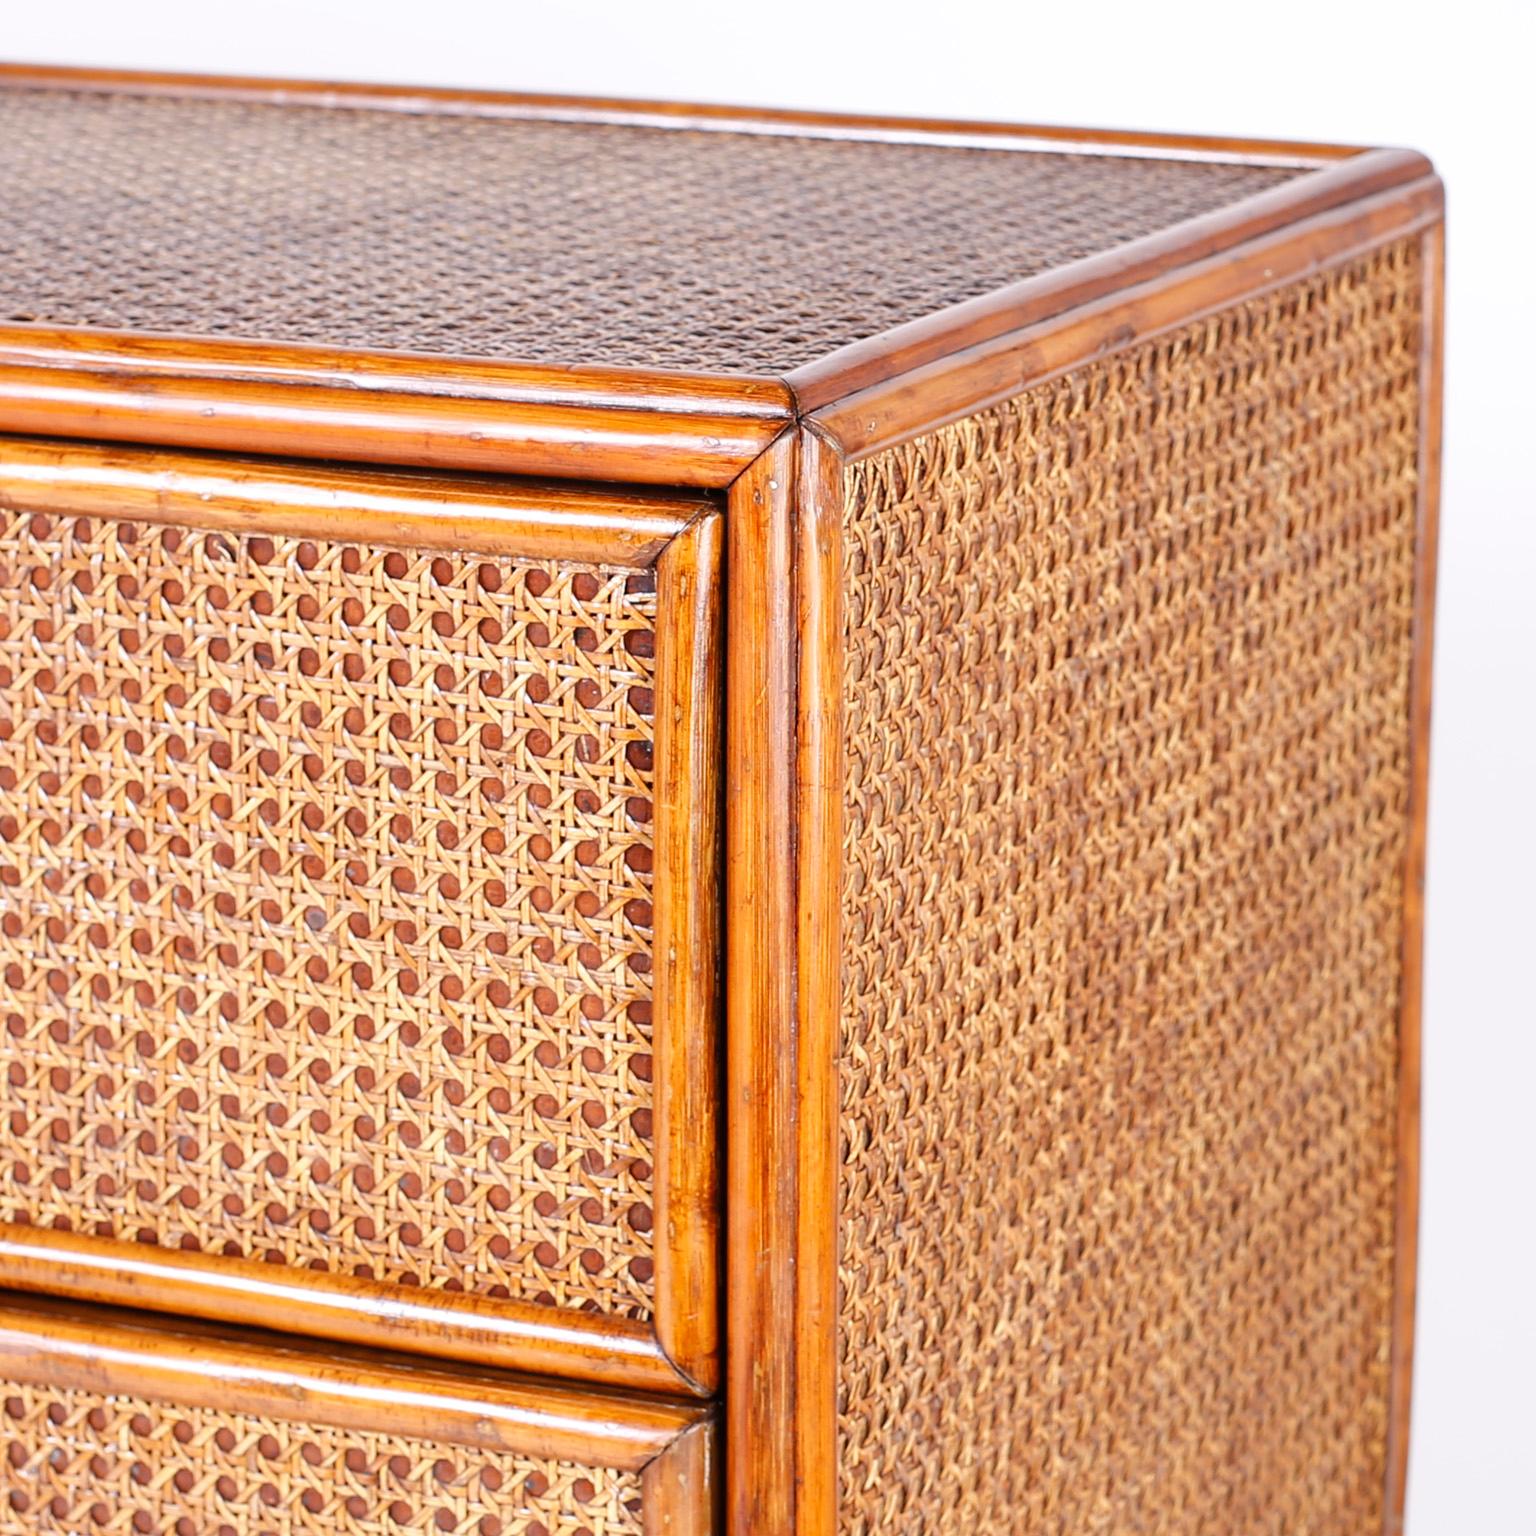 American Midcentury British Colonial Style Rattan and Caned Chest of Drawers